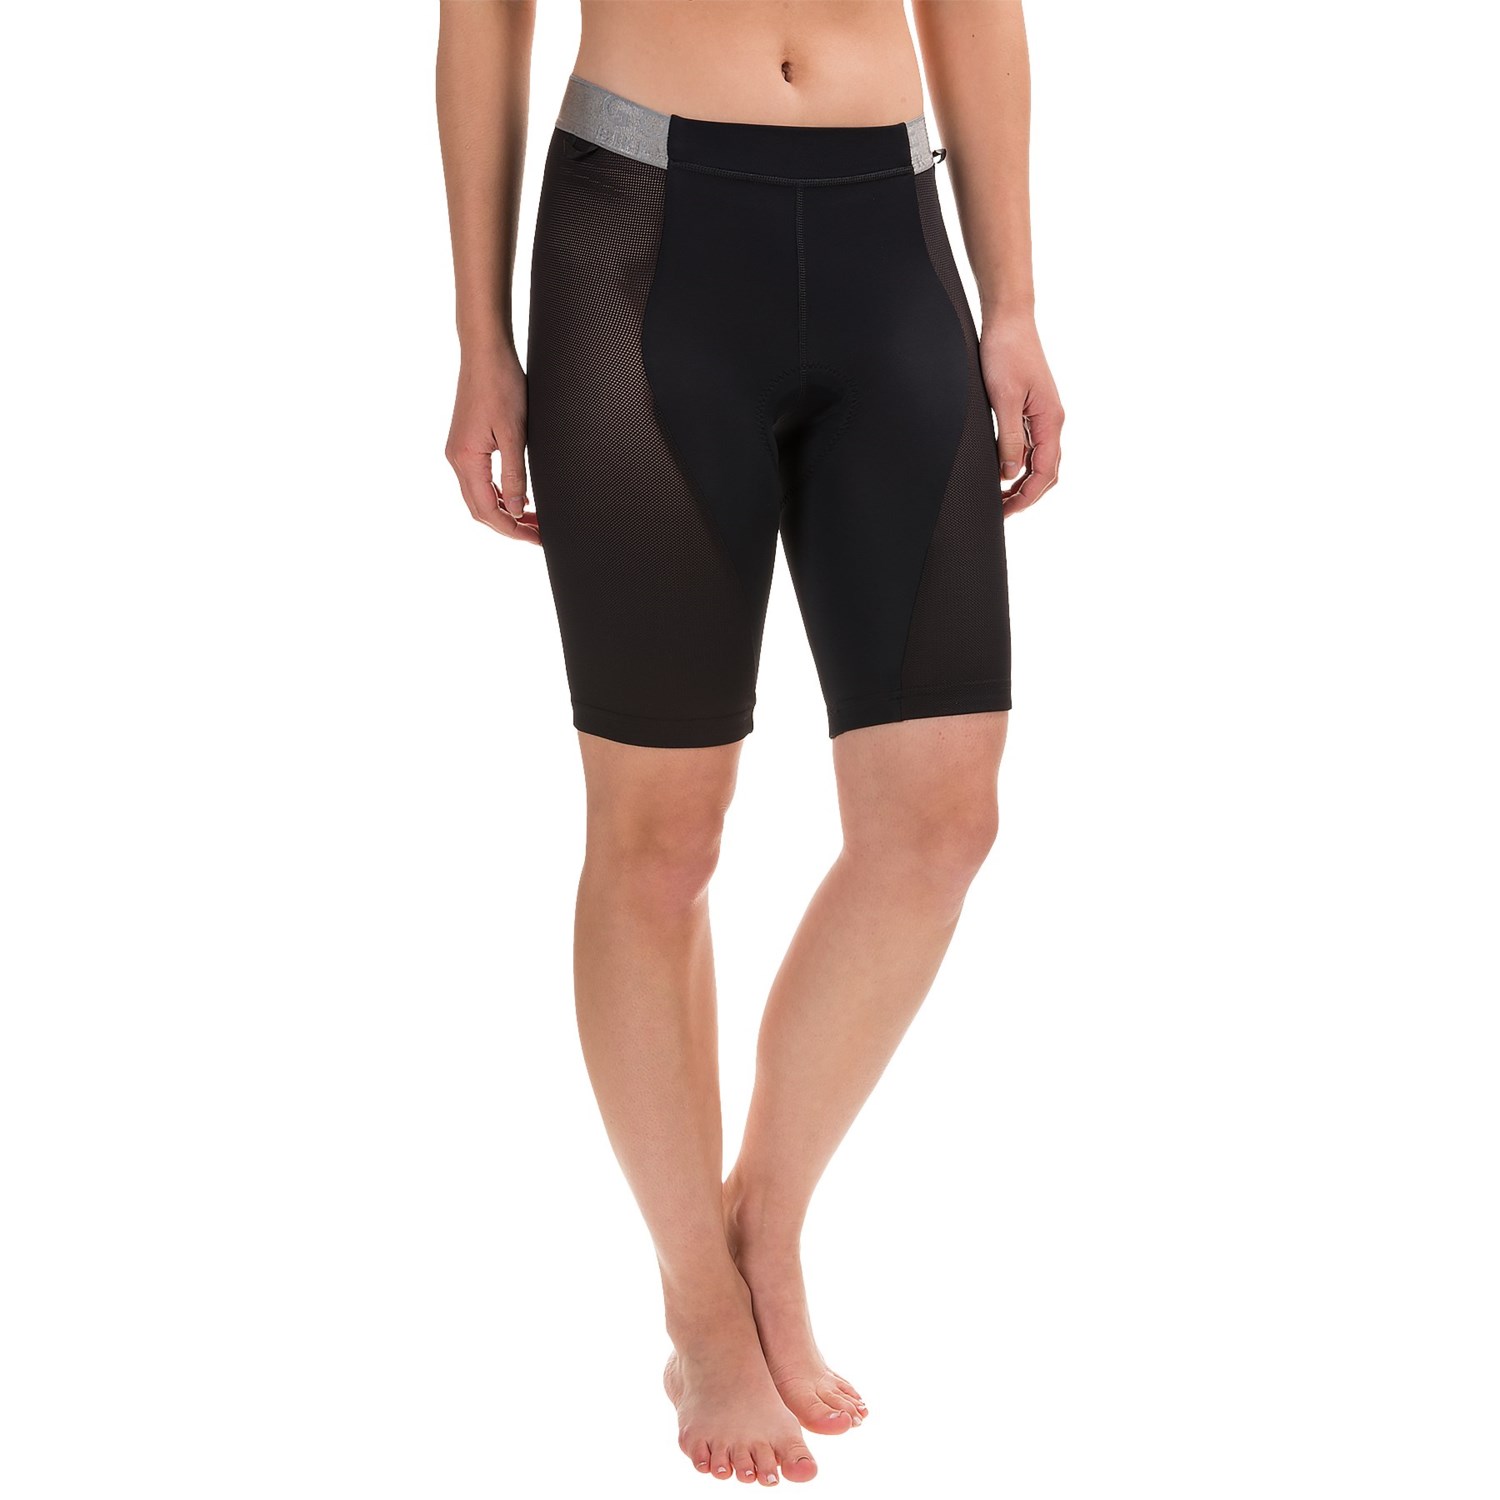 Bike Shorts Over Tights For Women Over 60